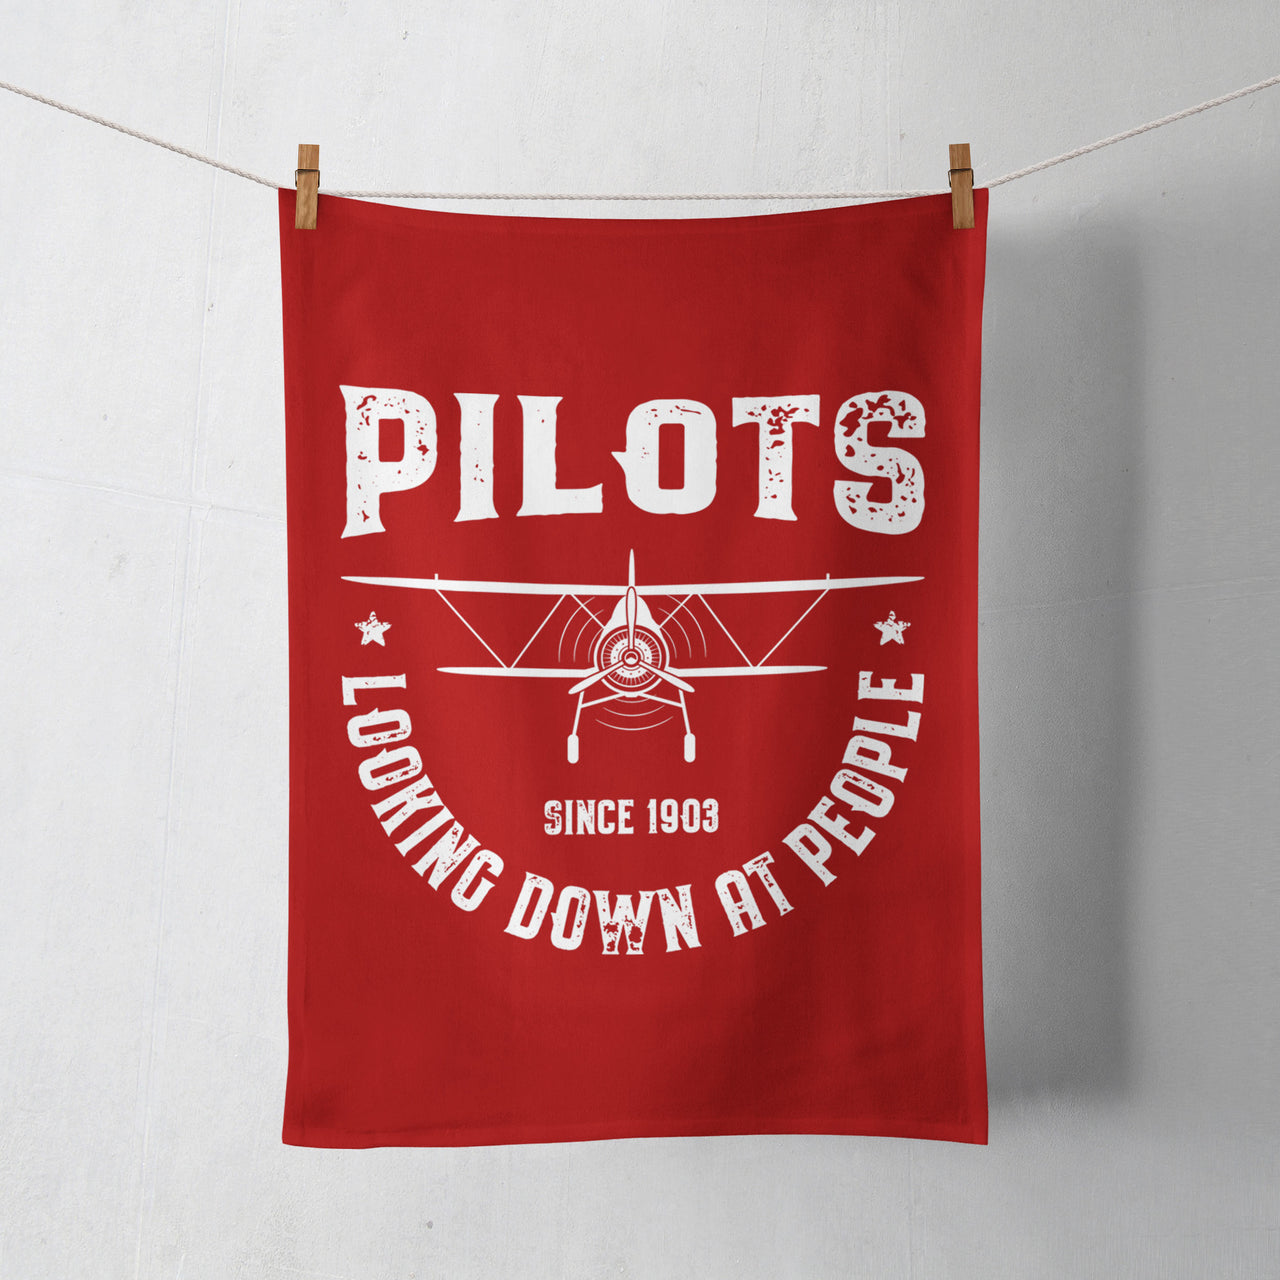 Pilots Looking Down at People Since 1903 Designed Towels